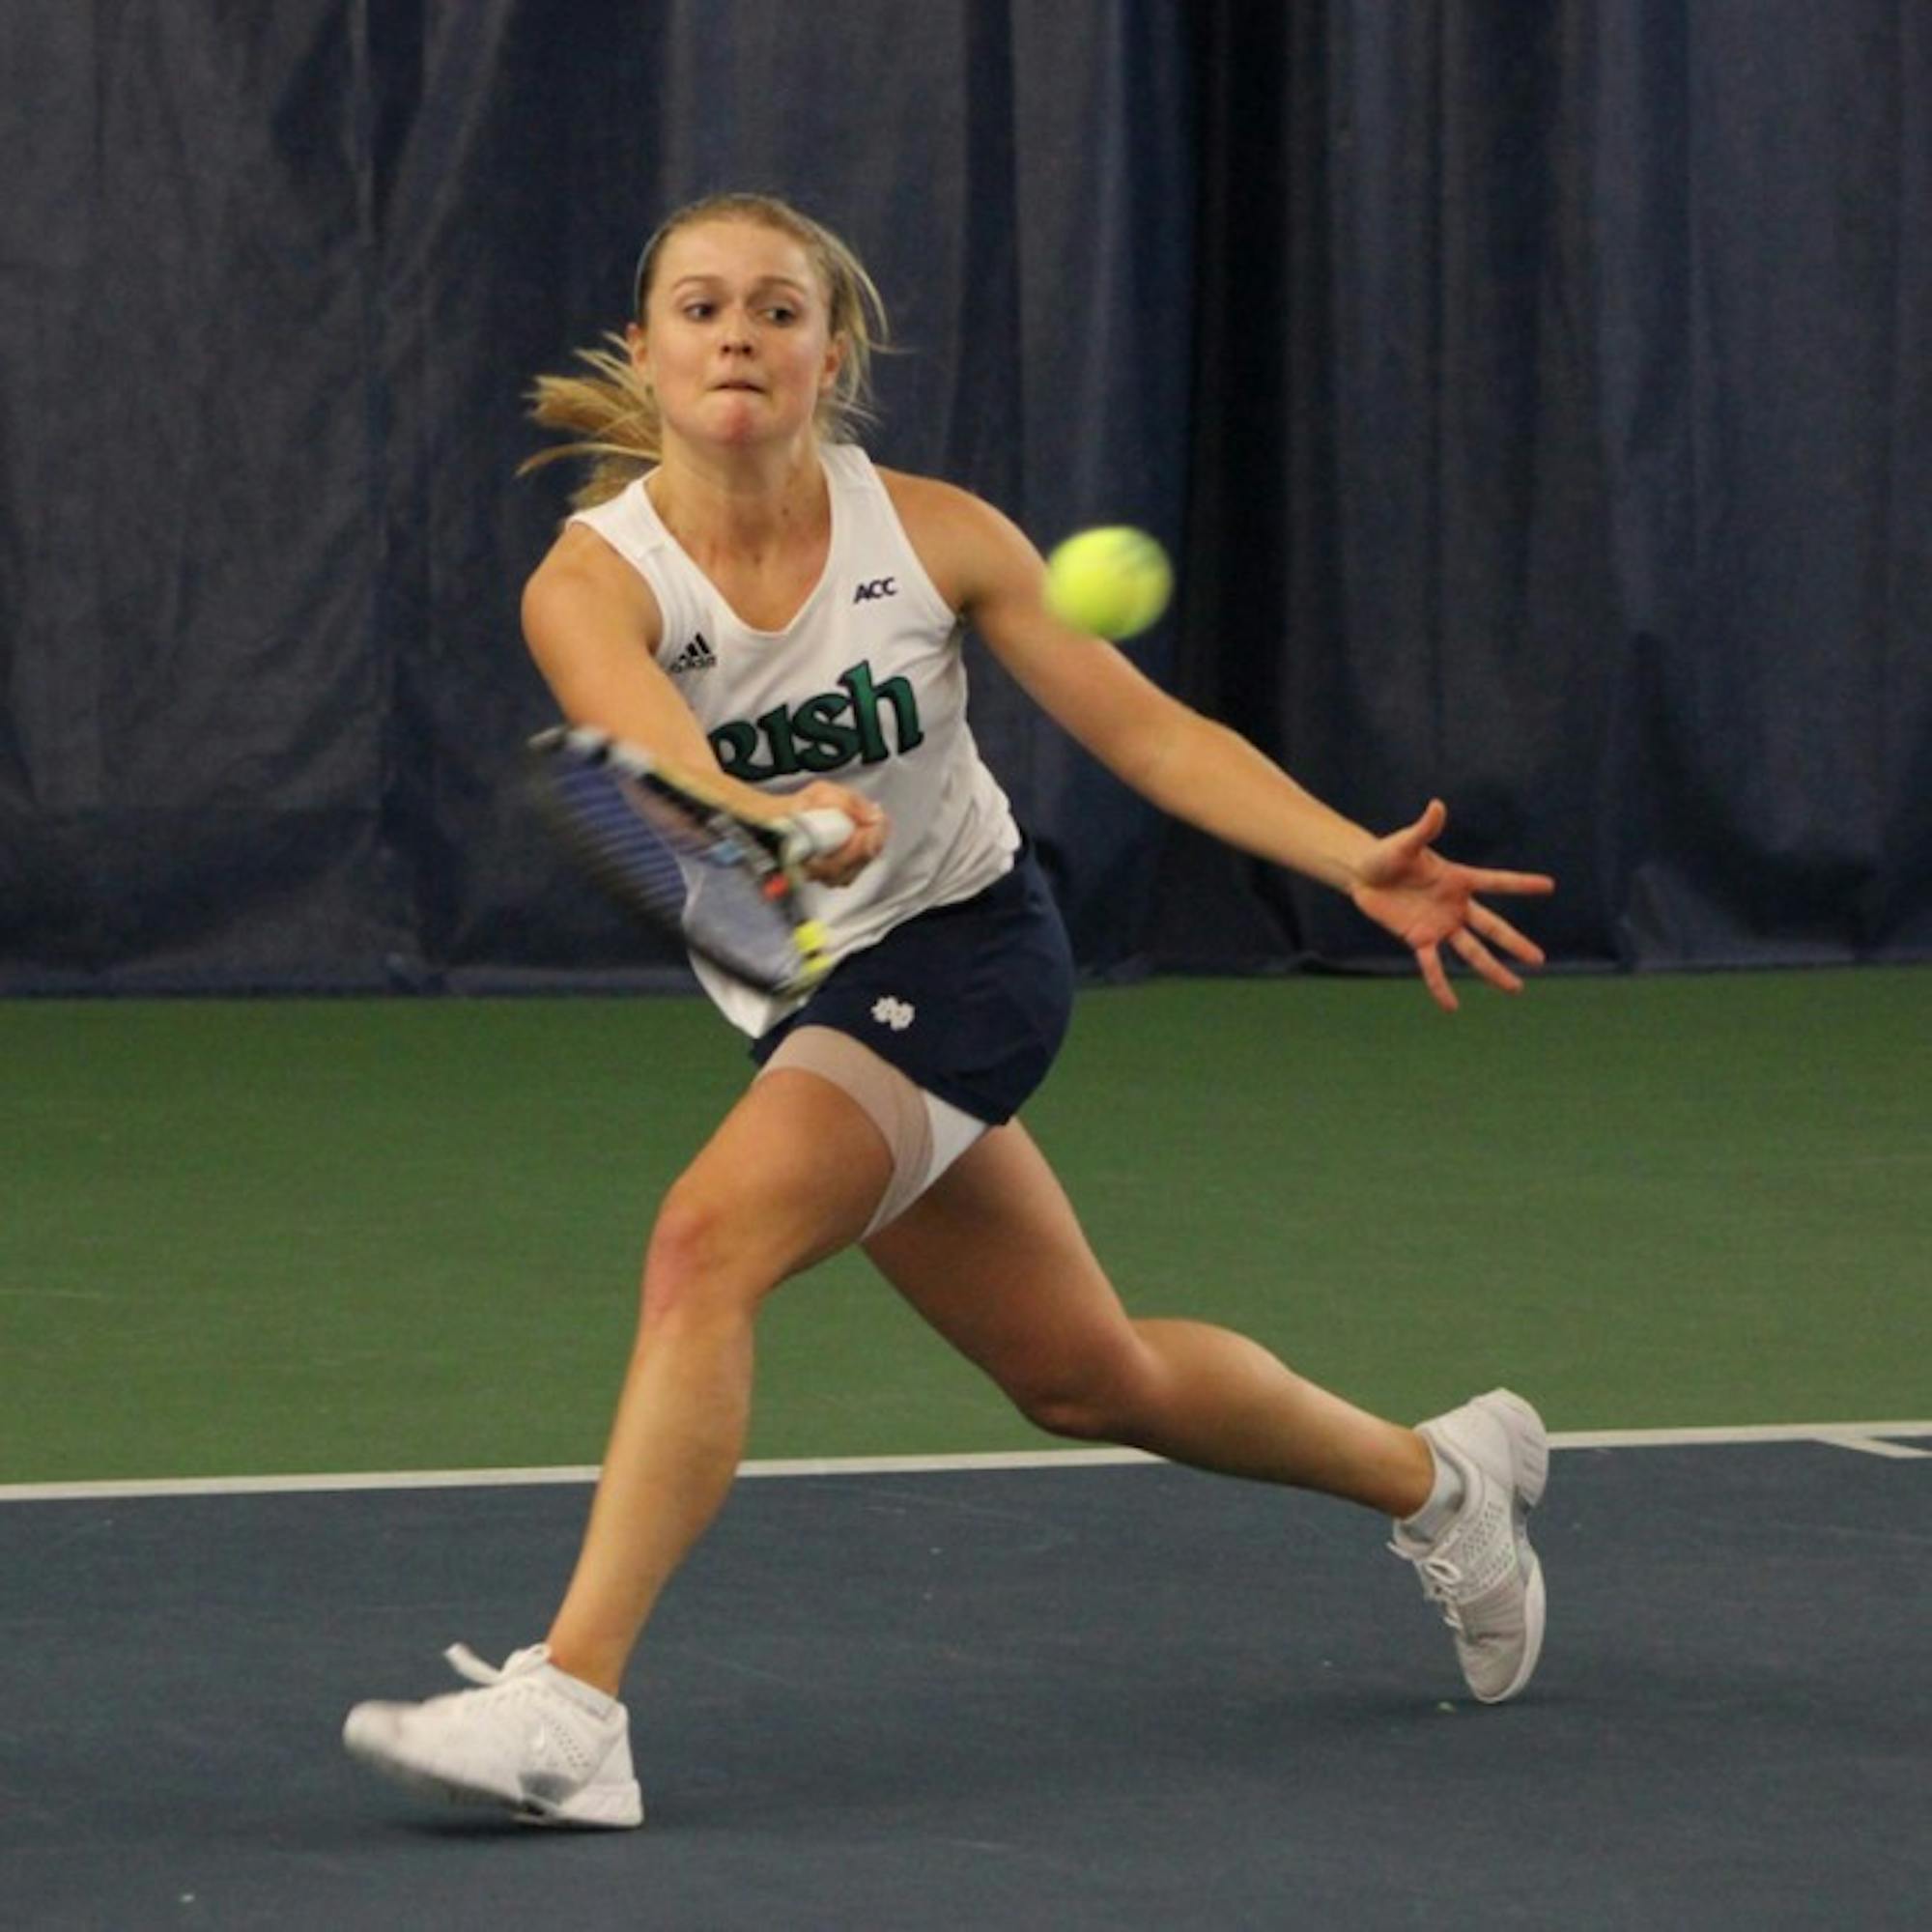 Irish freshman Mary Closs returns a volley during Notre Dame’s 4-3 victory over Indiana on Feb. 2 at the Eck Tennis Pavilion.